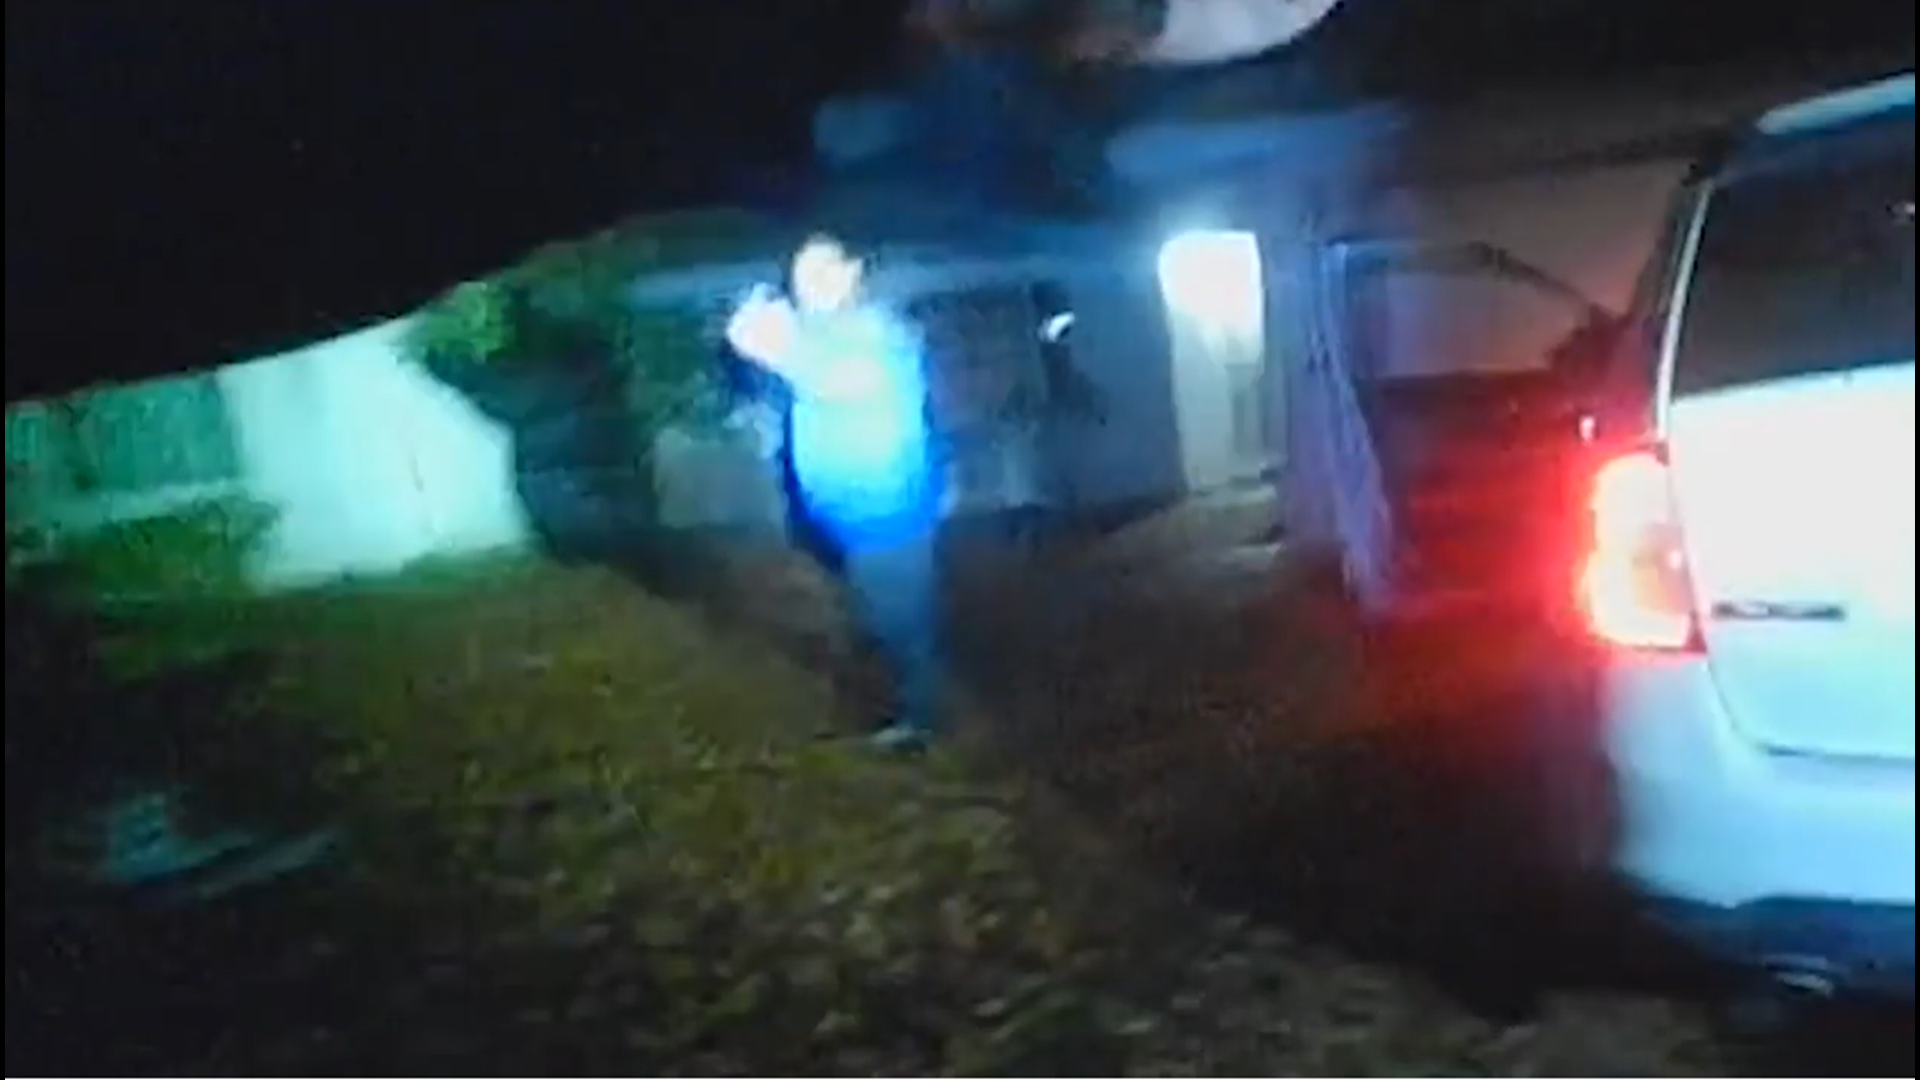 Stockton police released bodycam video of two officers shooting a man on Dec. 14 after he allegedly pointed a gun at them.